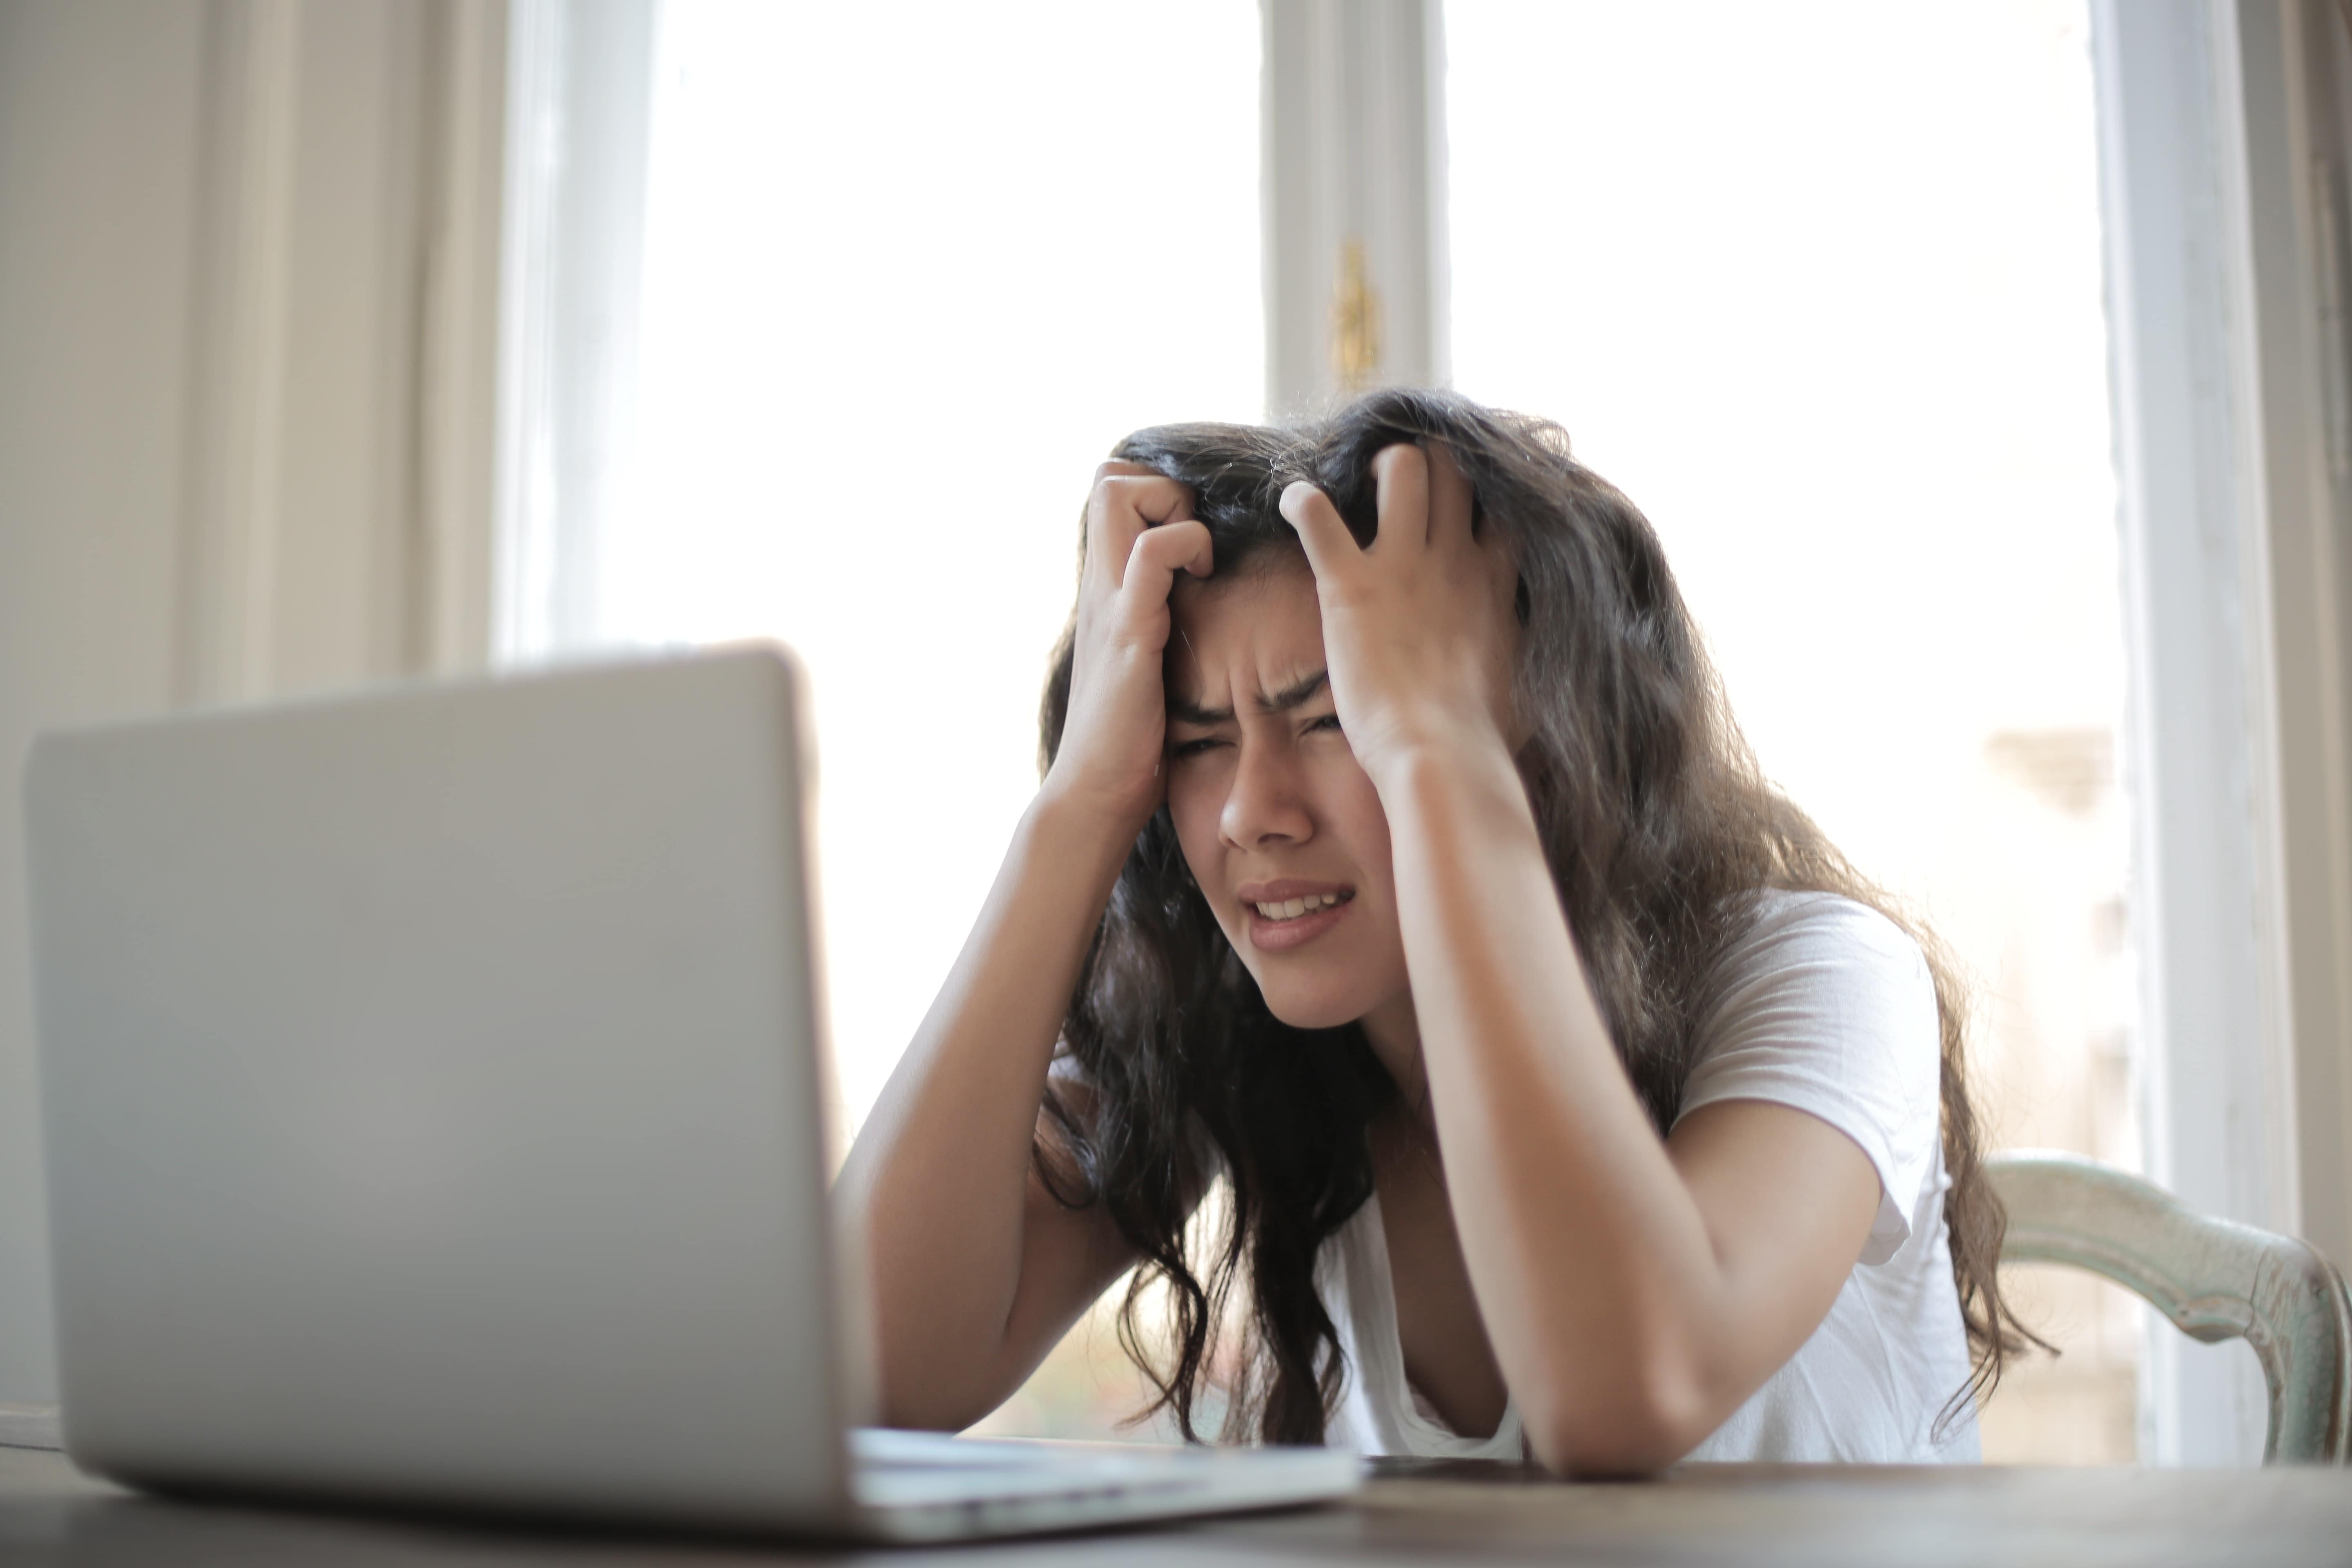 Woman in white shirt pulling hair out in frustration with her laptop